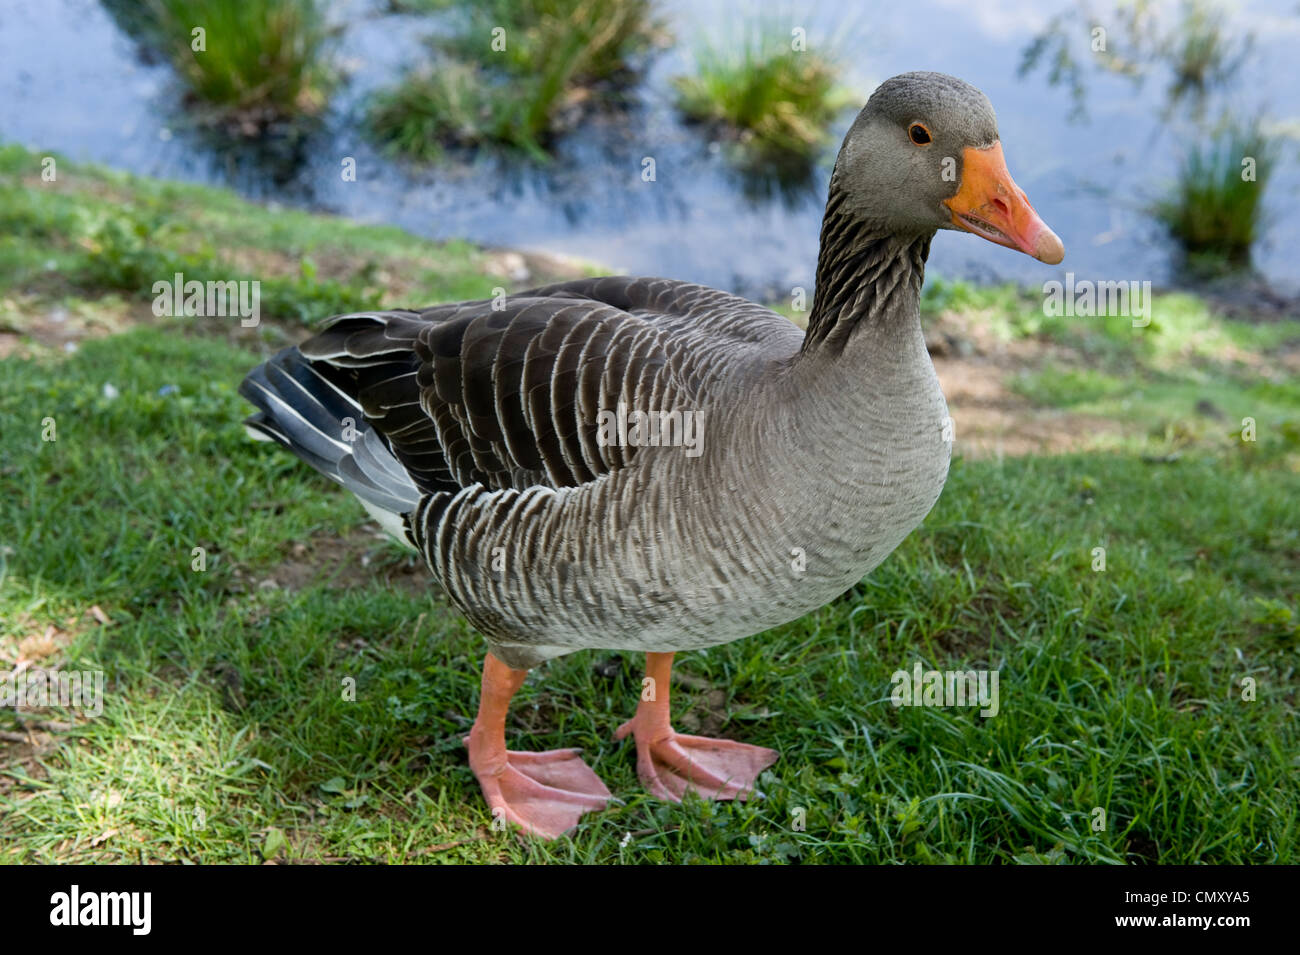 The profile of a gray duck with an orange beak. Stock Photo